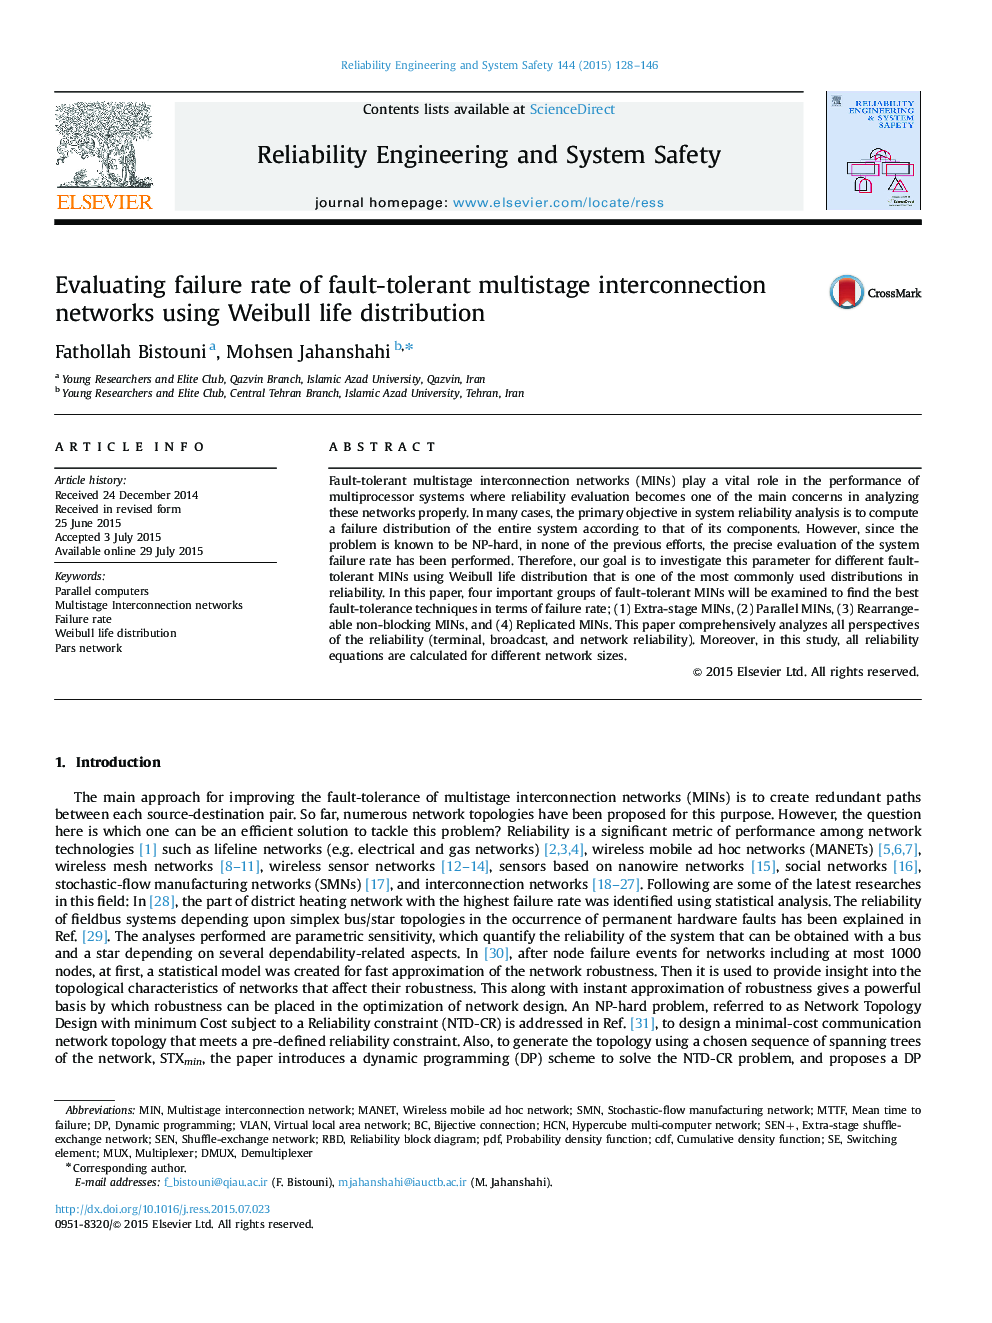 Evaluating failure rate of fault-tolerant multistage interconnection networks using Weibull life distribution